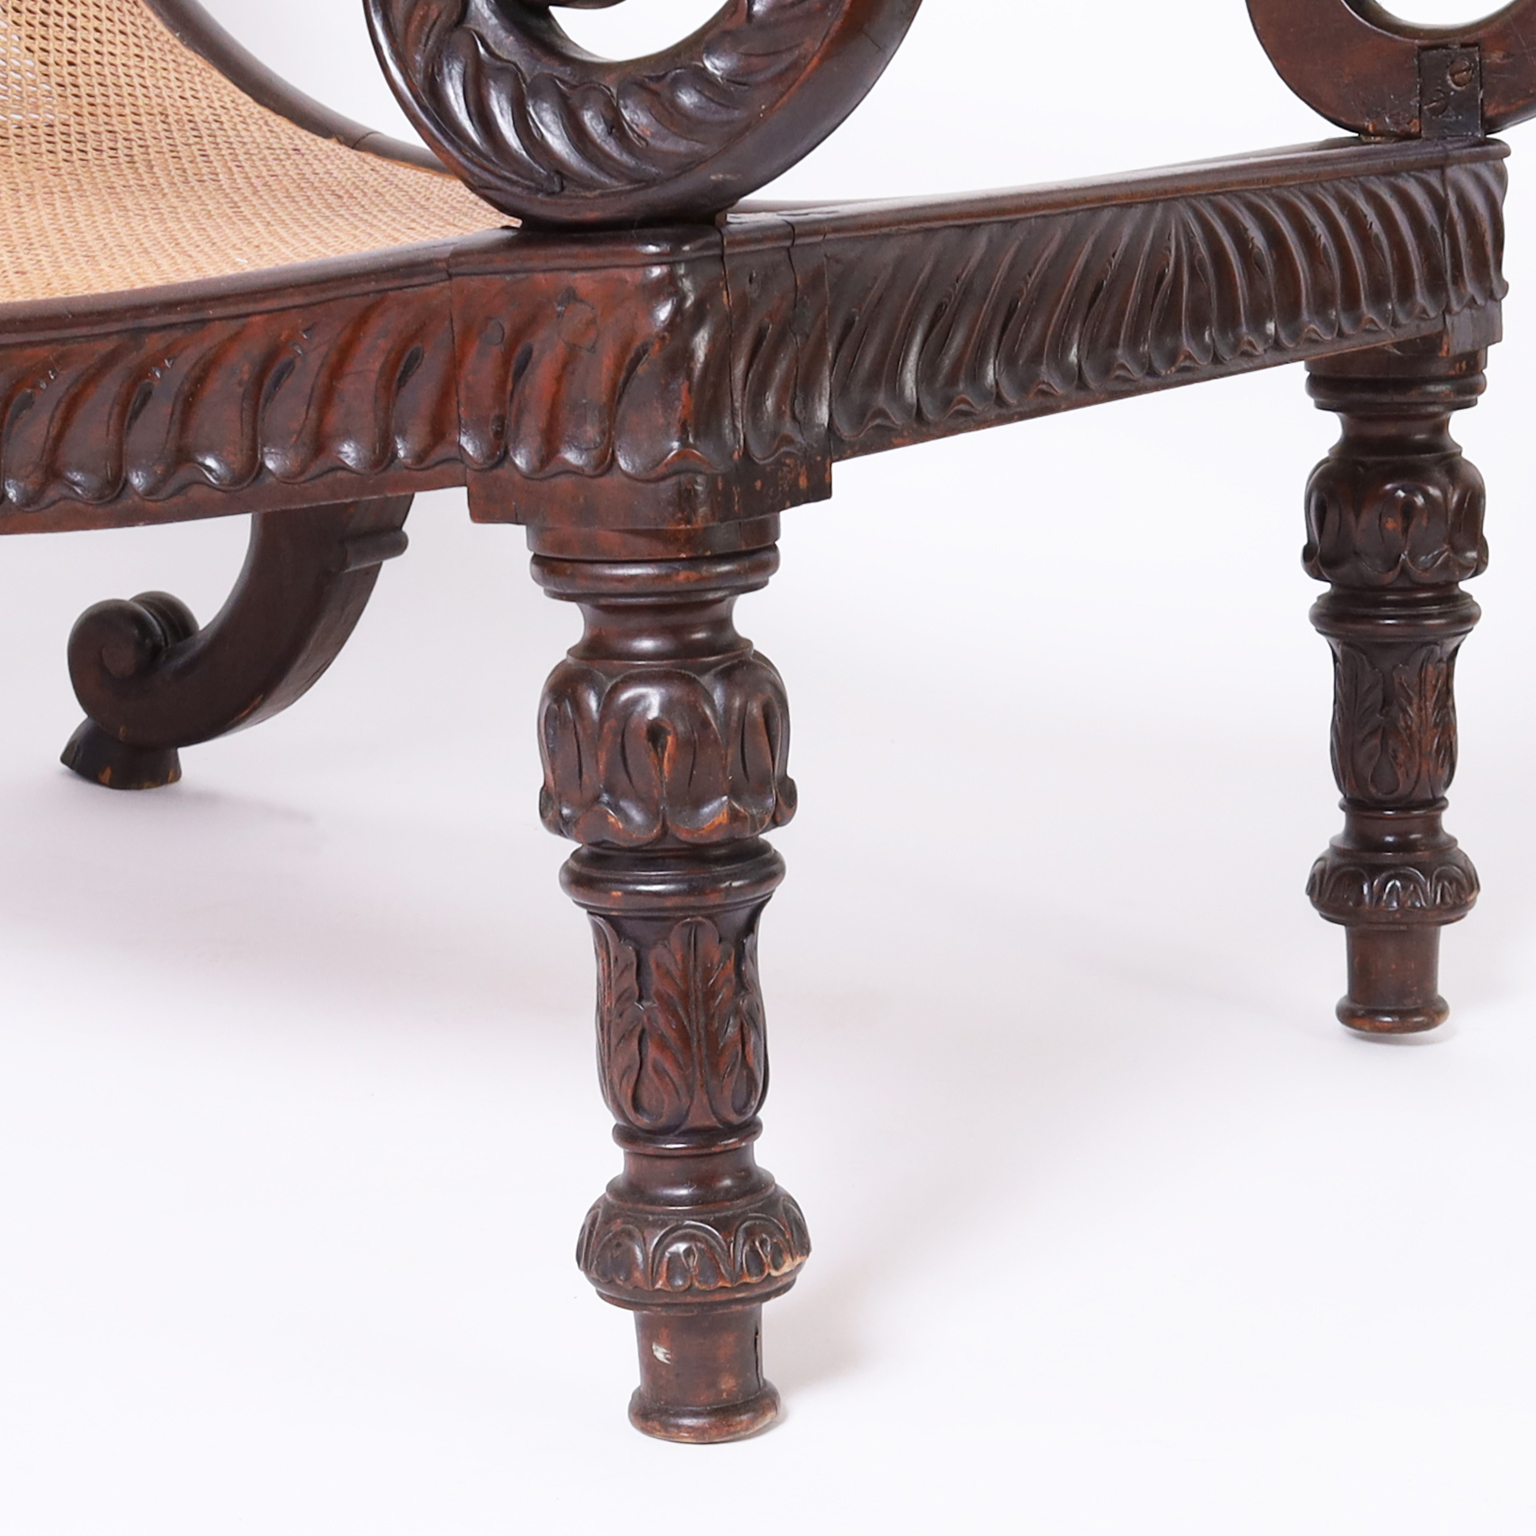 Antique British Colonial Caned and Carved Mahogany Planters Chair